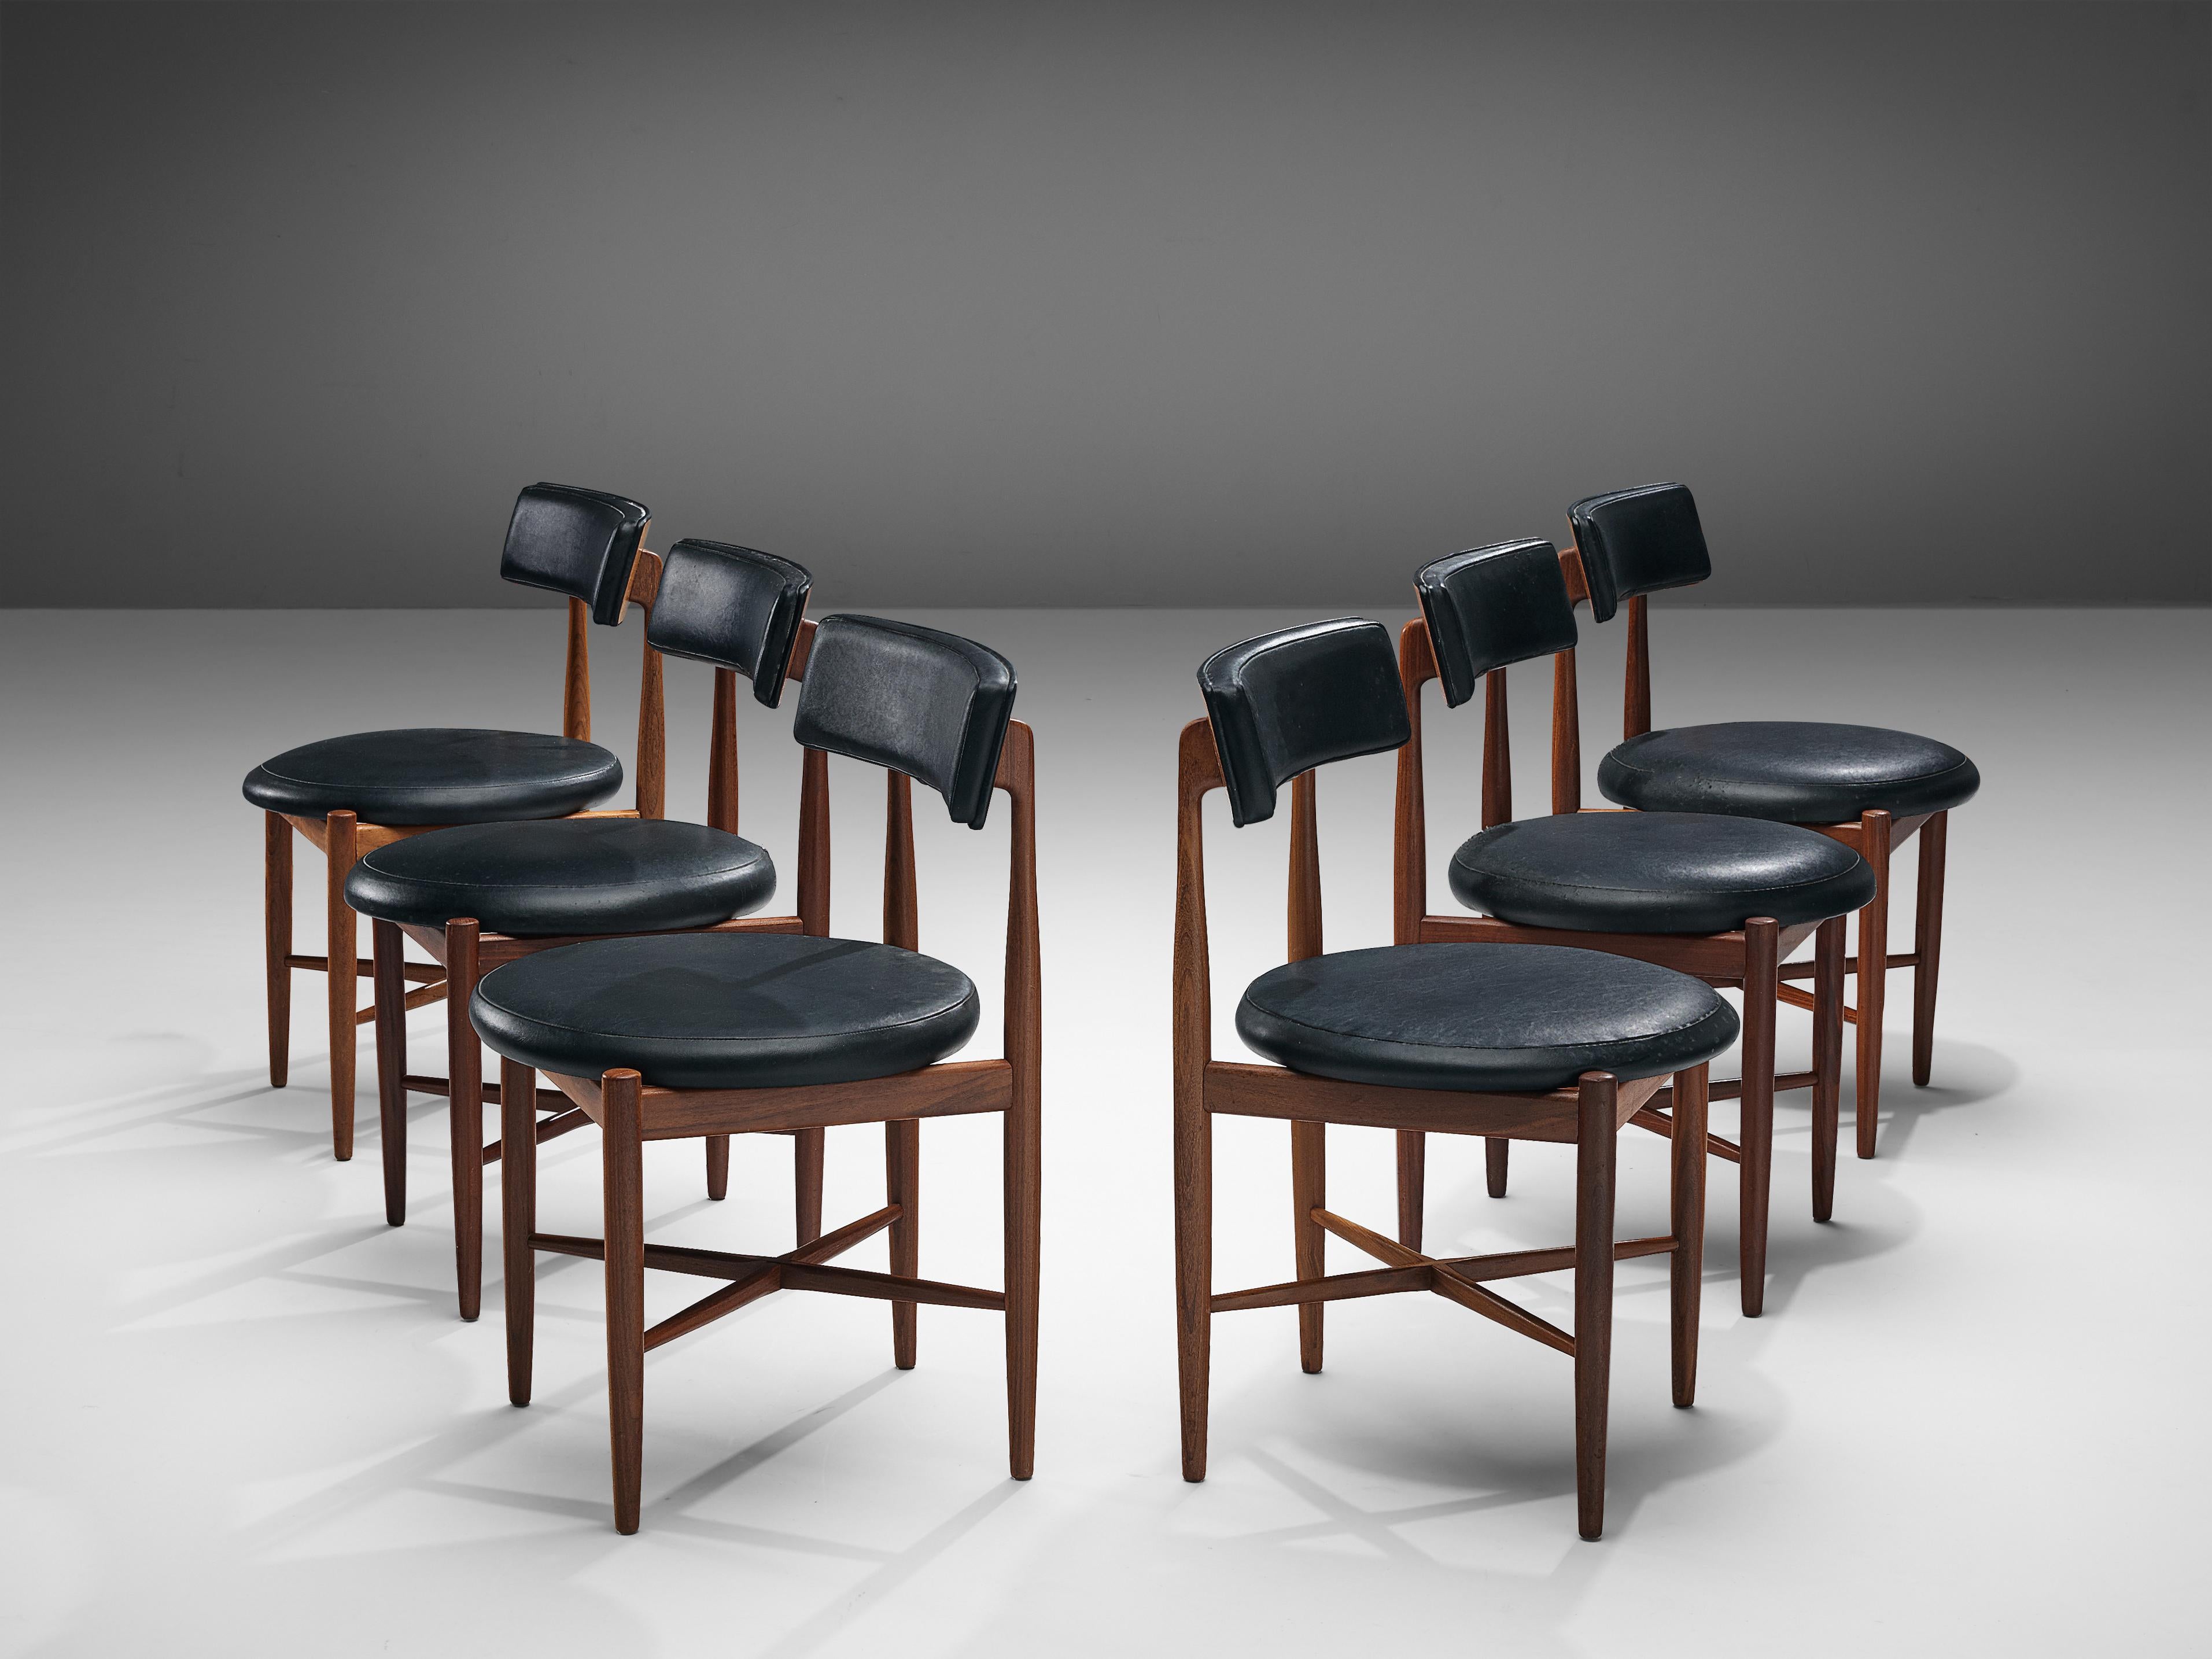 Victor Bramwell Wilkins for G Plan, set of six dining chairs, model 'Fresco', faux leather, teak, United Kingdom, 1967

Set of eight dining chairs, designed by Victor Bramwell Wilkins for the British manufacturer G Plan in 1967. Wilkins designed the